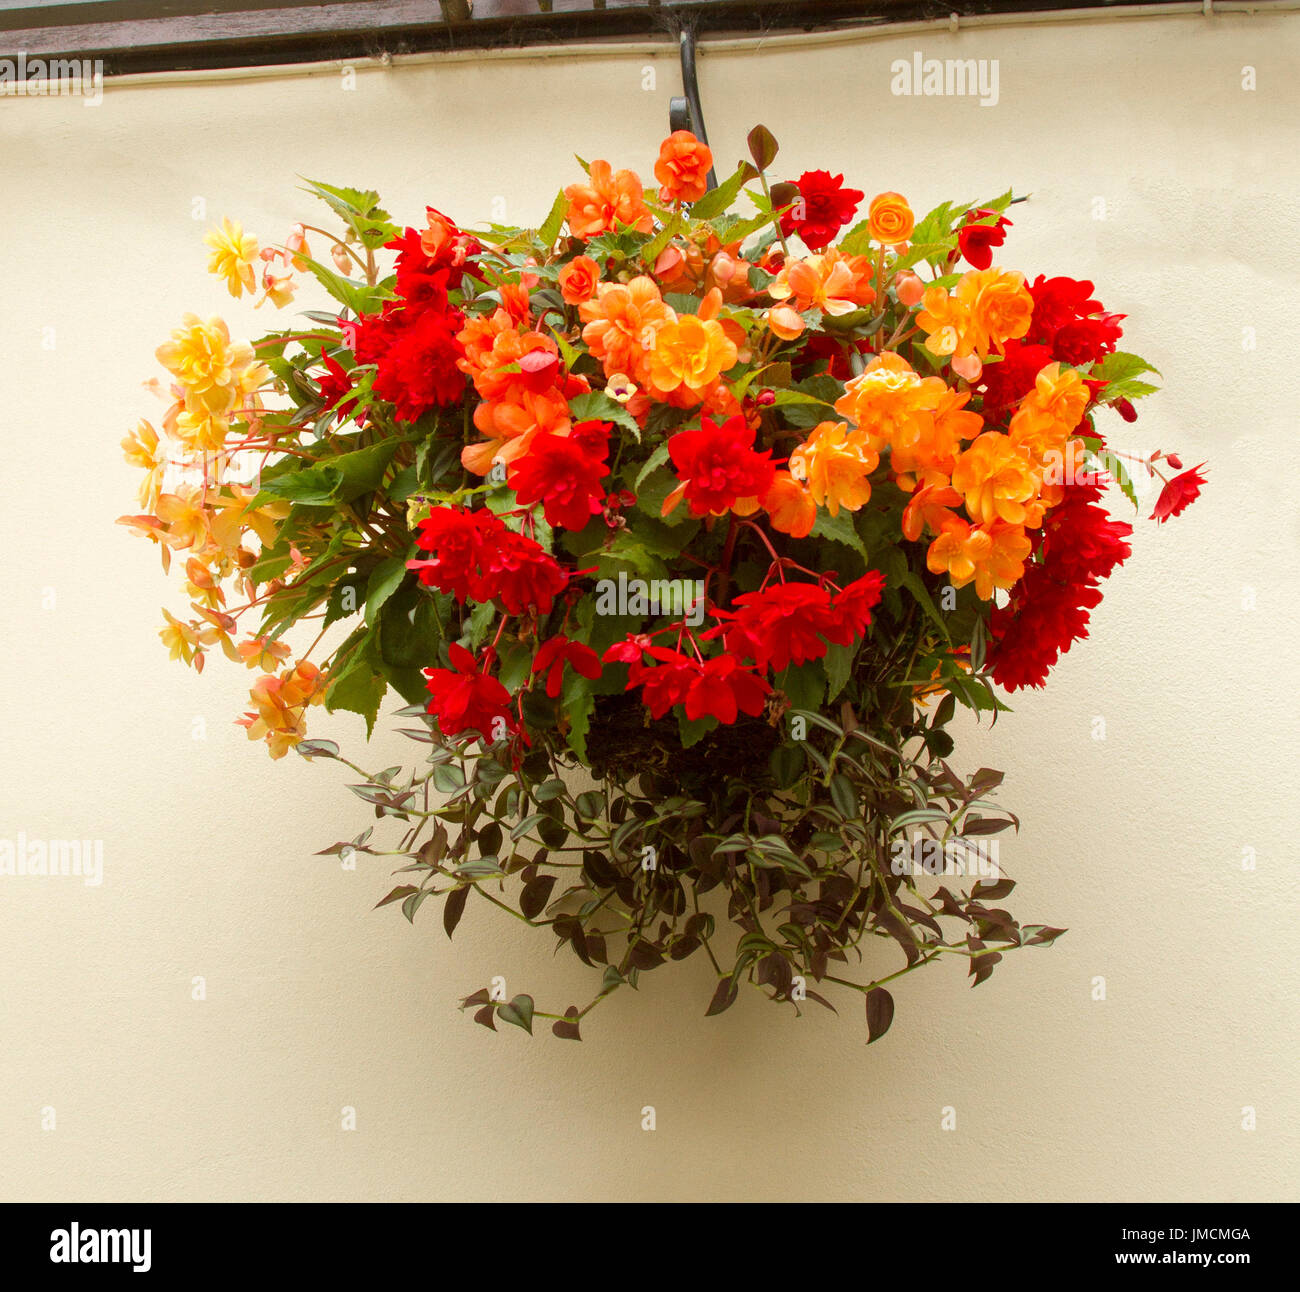 Mass of colourful flowering plants, red and orange tuberous begonias, in hanging basket against cream wall Stock Photo